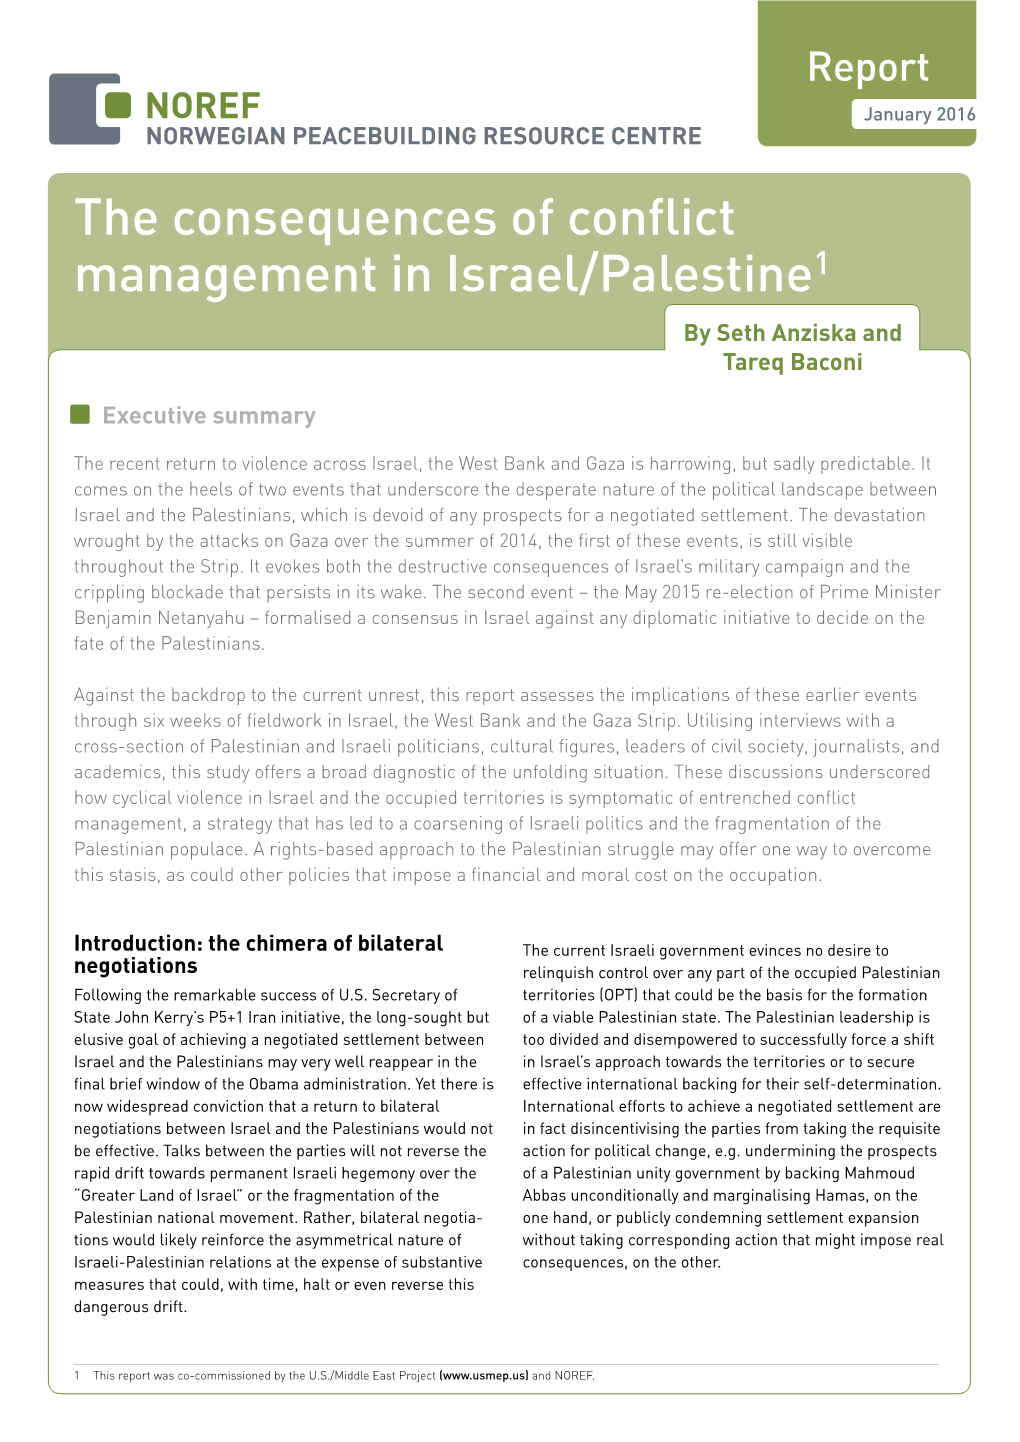 The Consequence of Conflict Management in Israel/Palestine